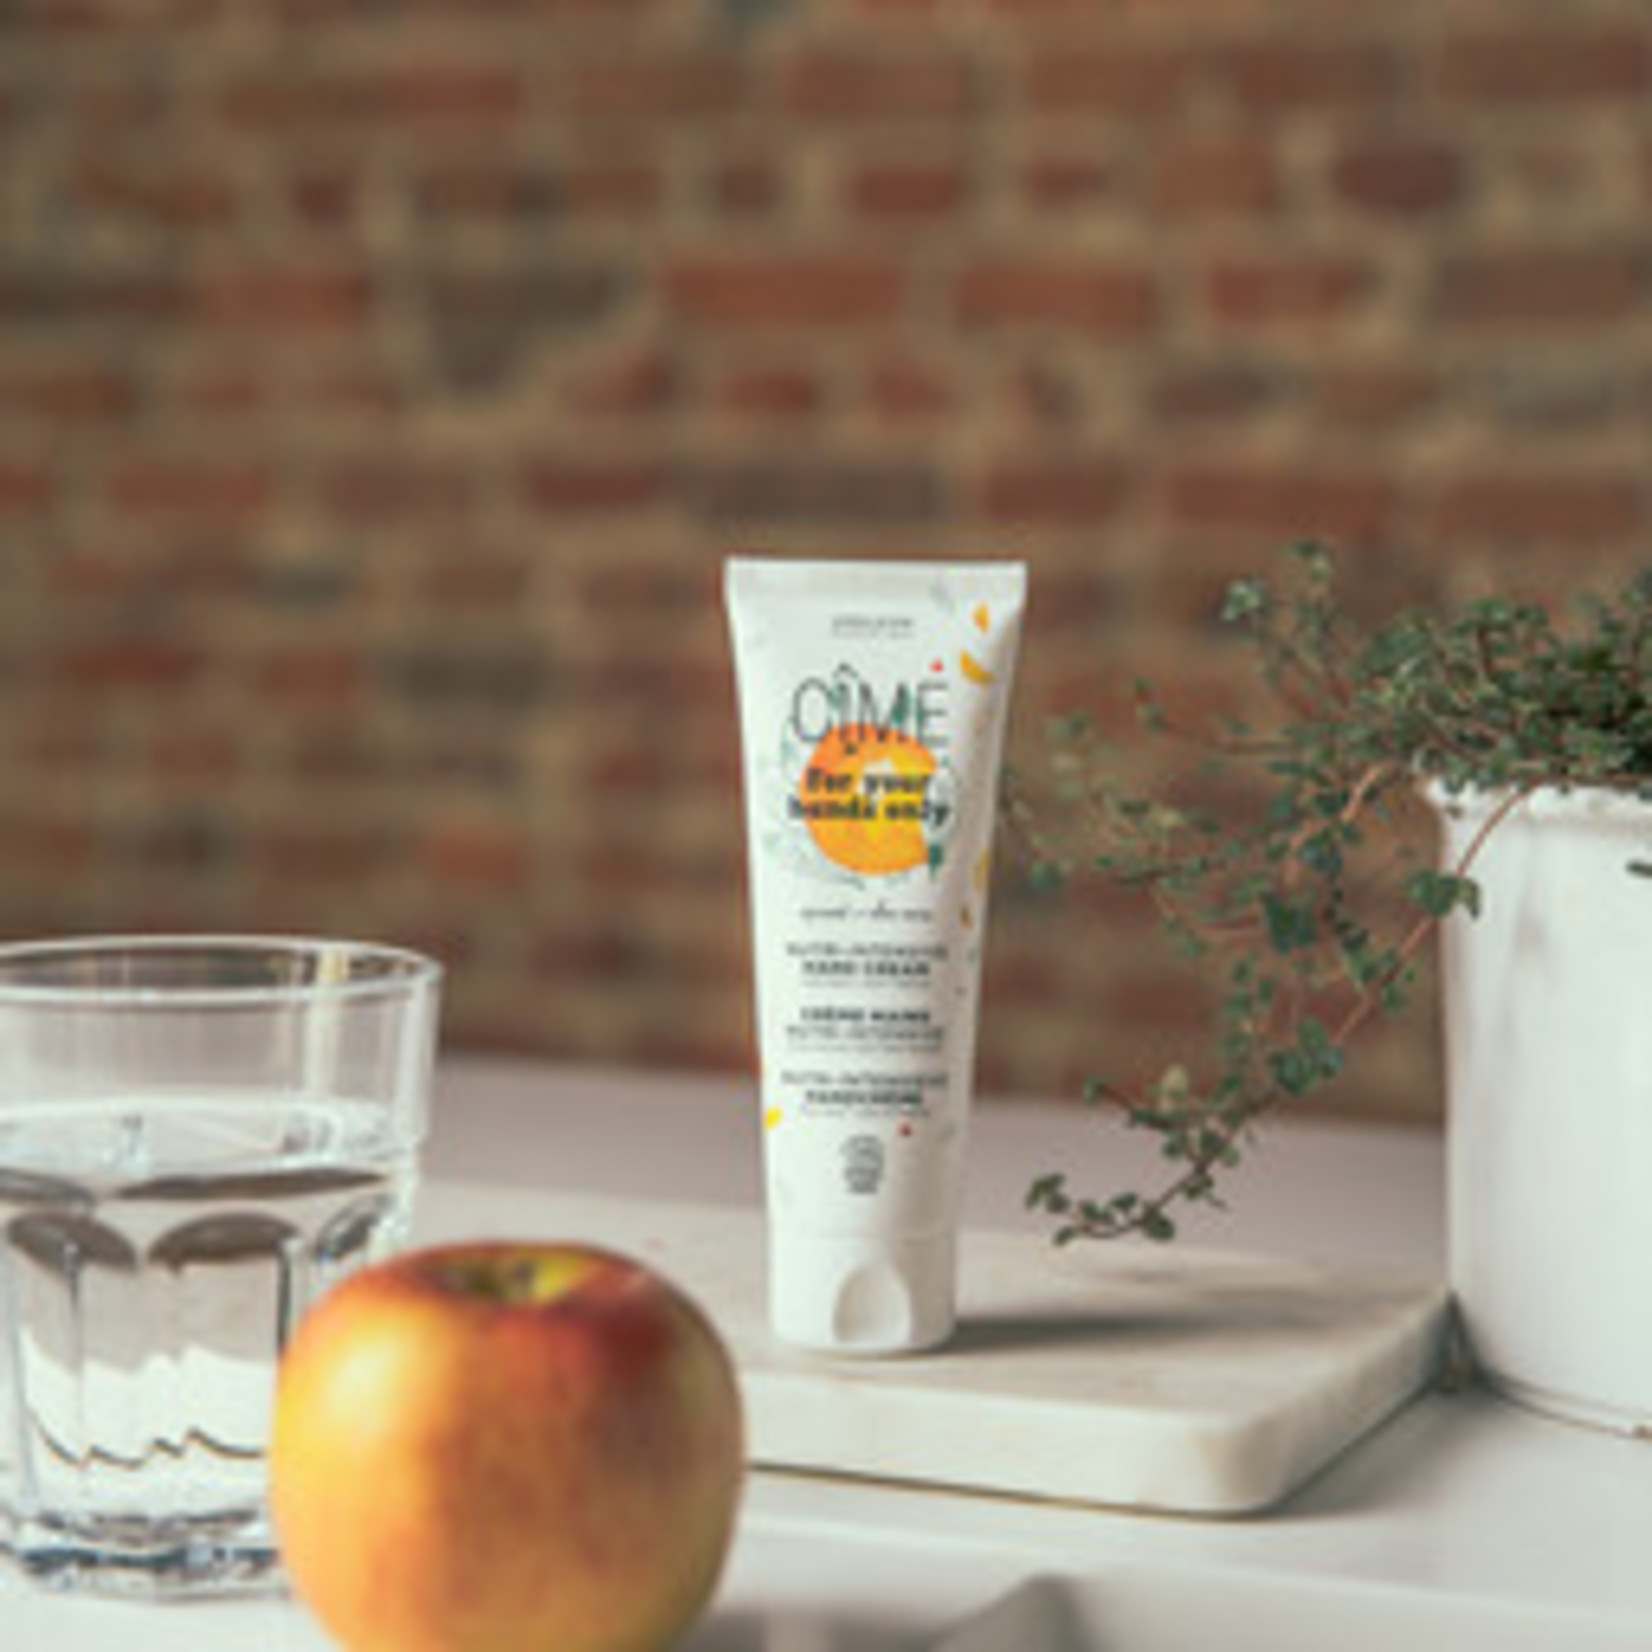 Cîme Nutri-intensieve handcrème - For your hands only